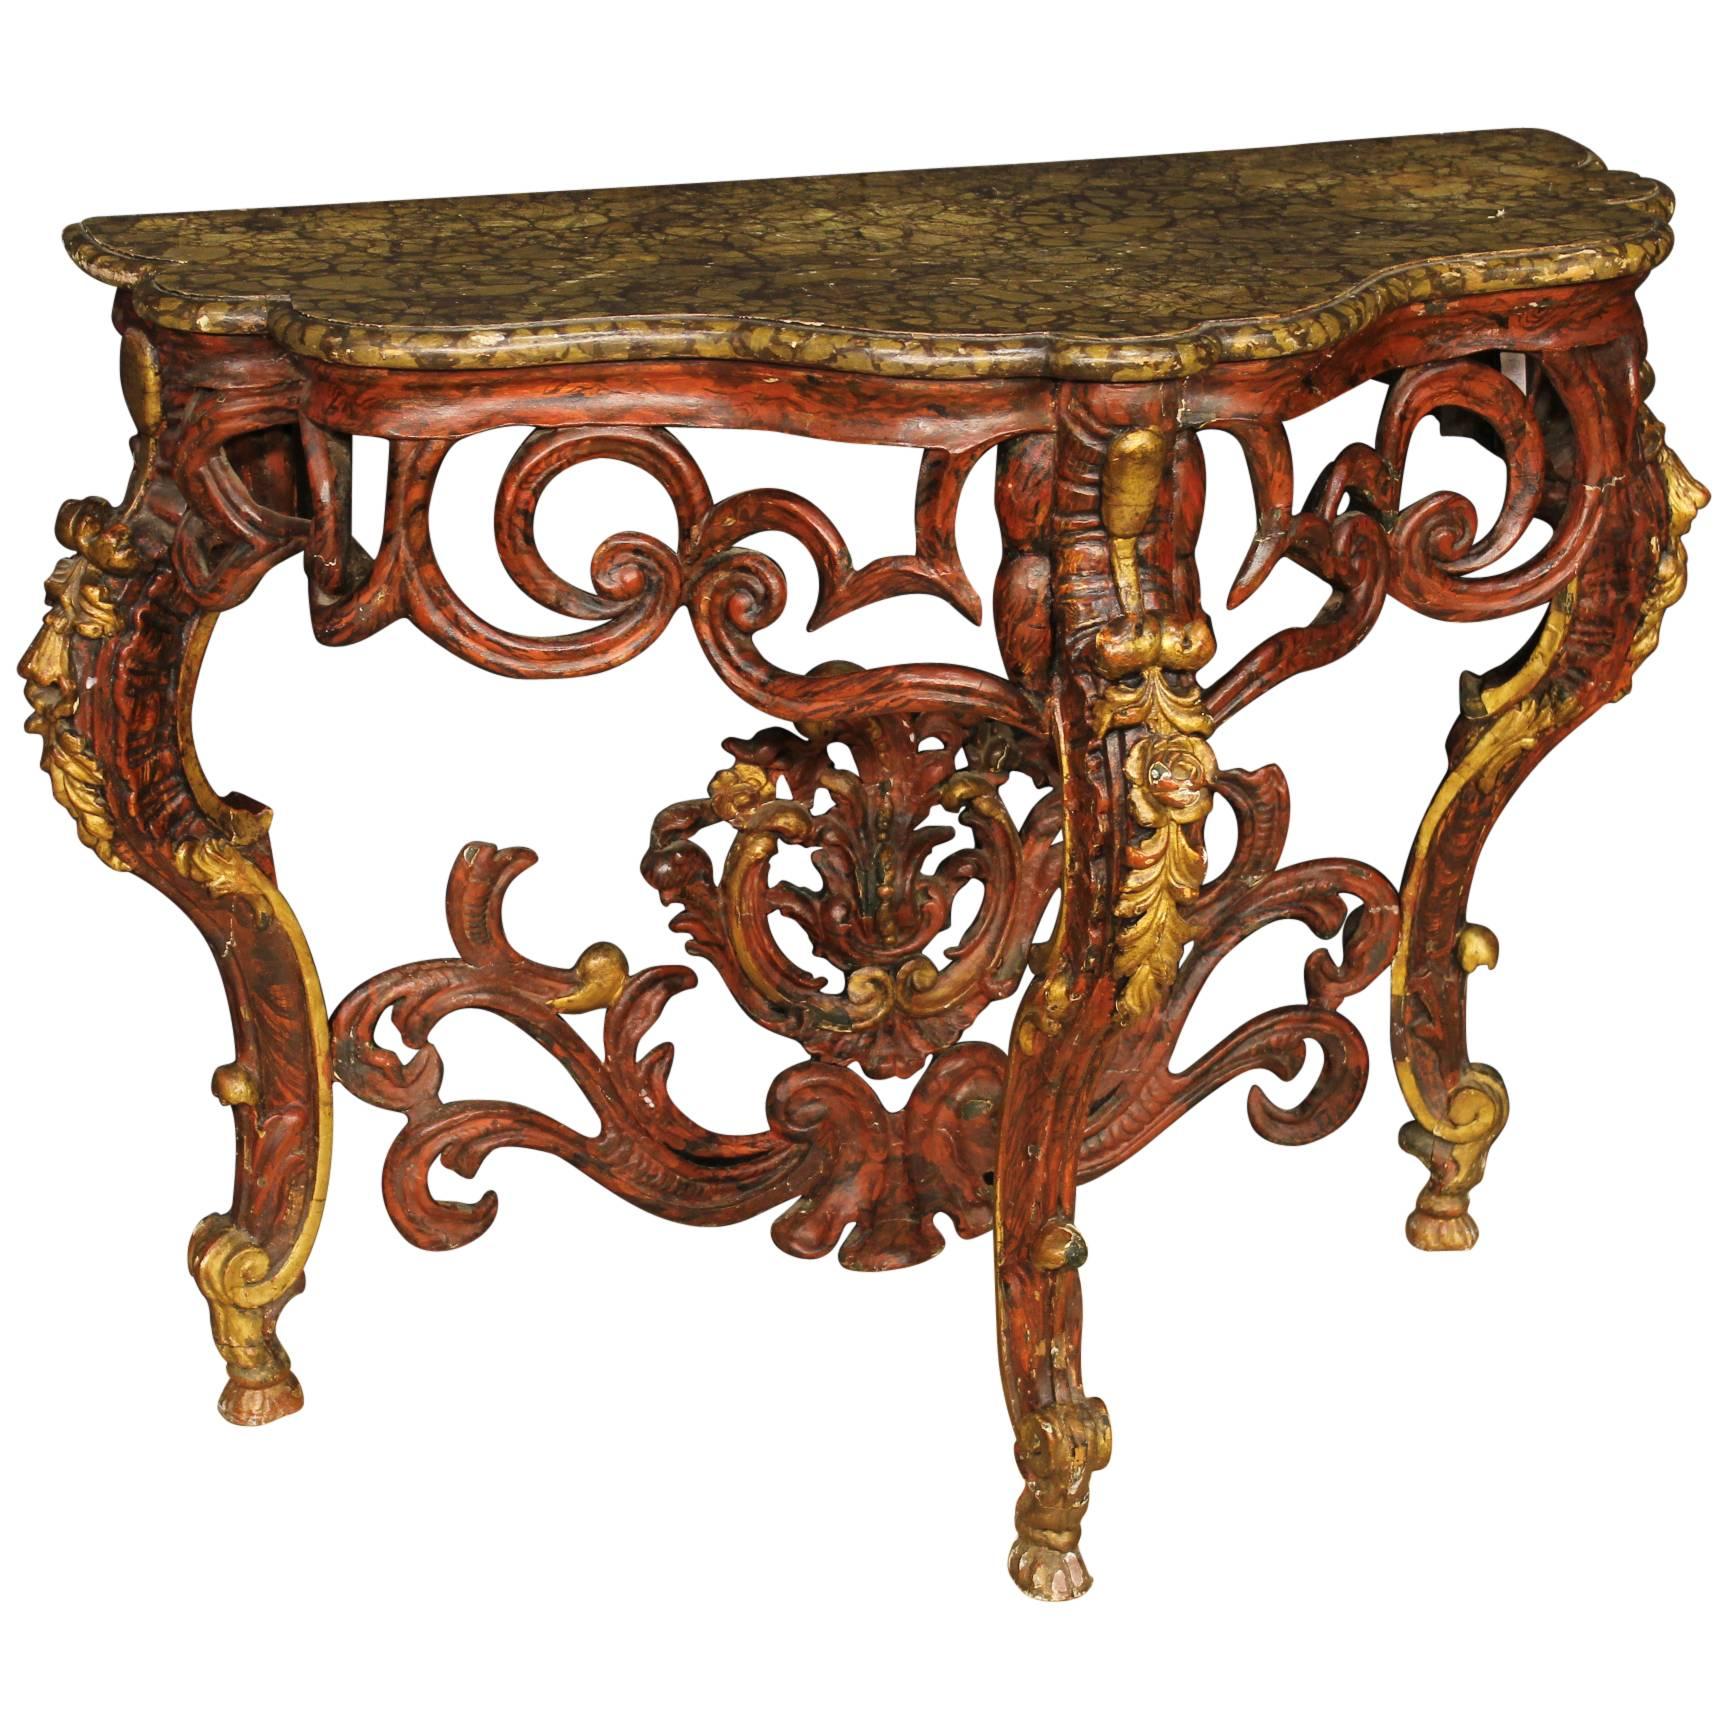 Console Table Made by Carved Lacquered and Golden Wood